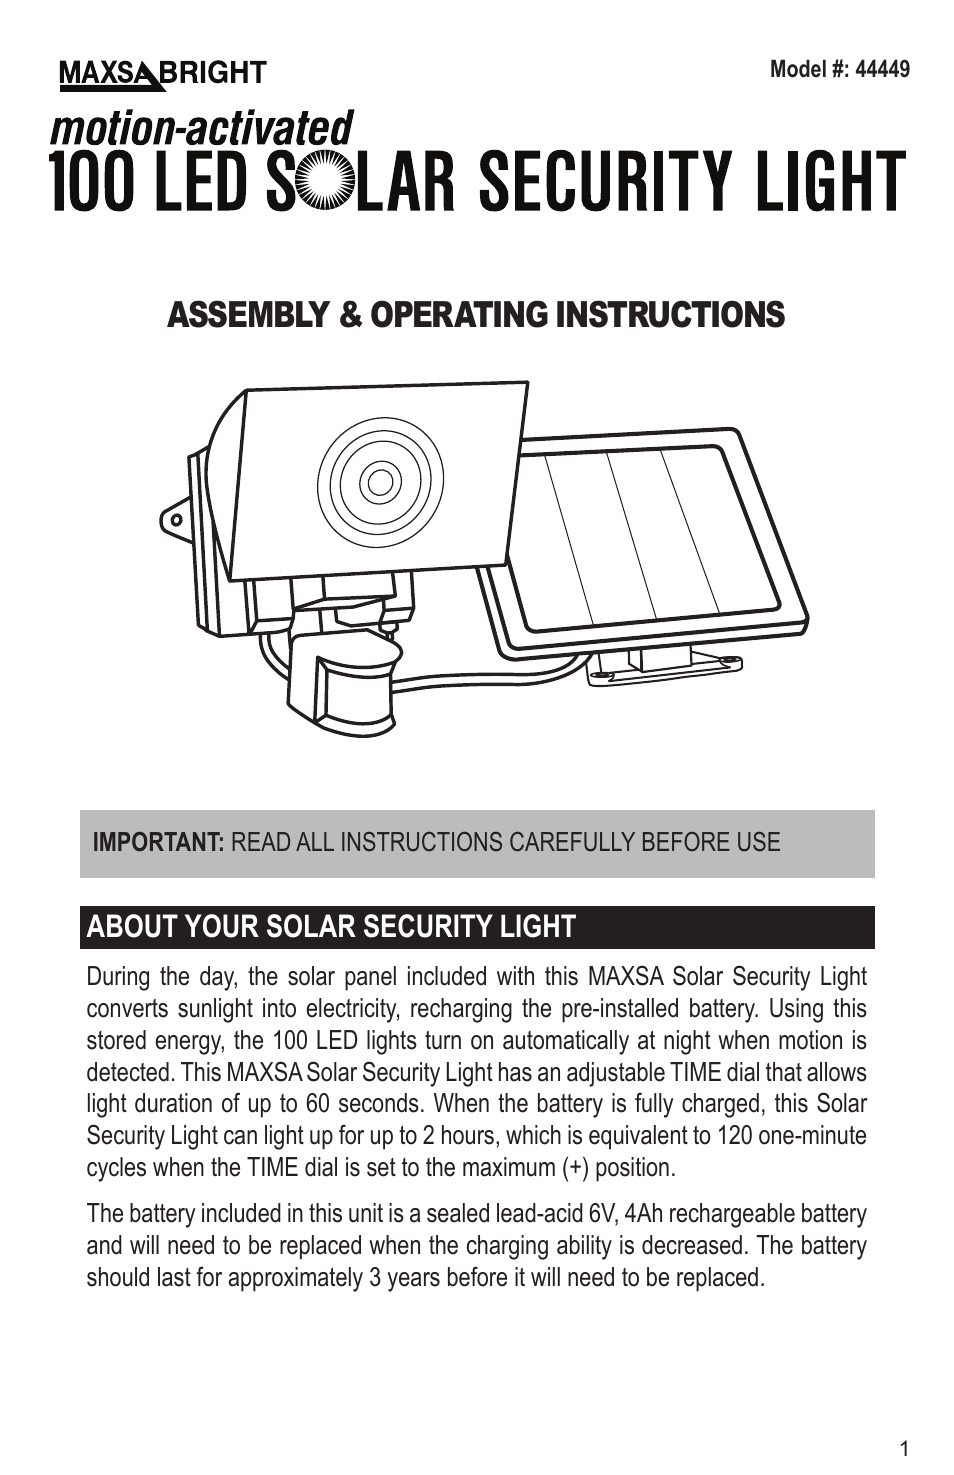 Solar-Powered 100 LED Motion-Activated Outdoor Security Floodlight